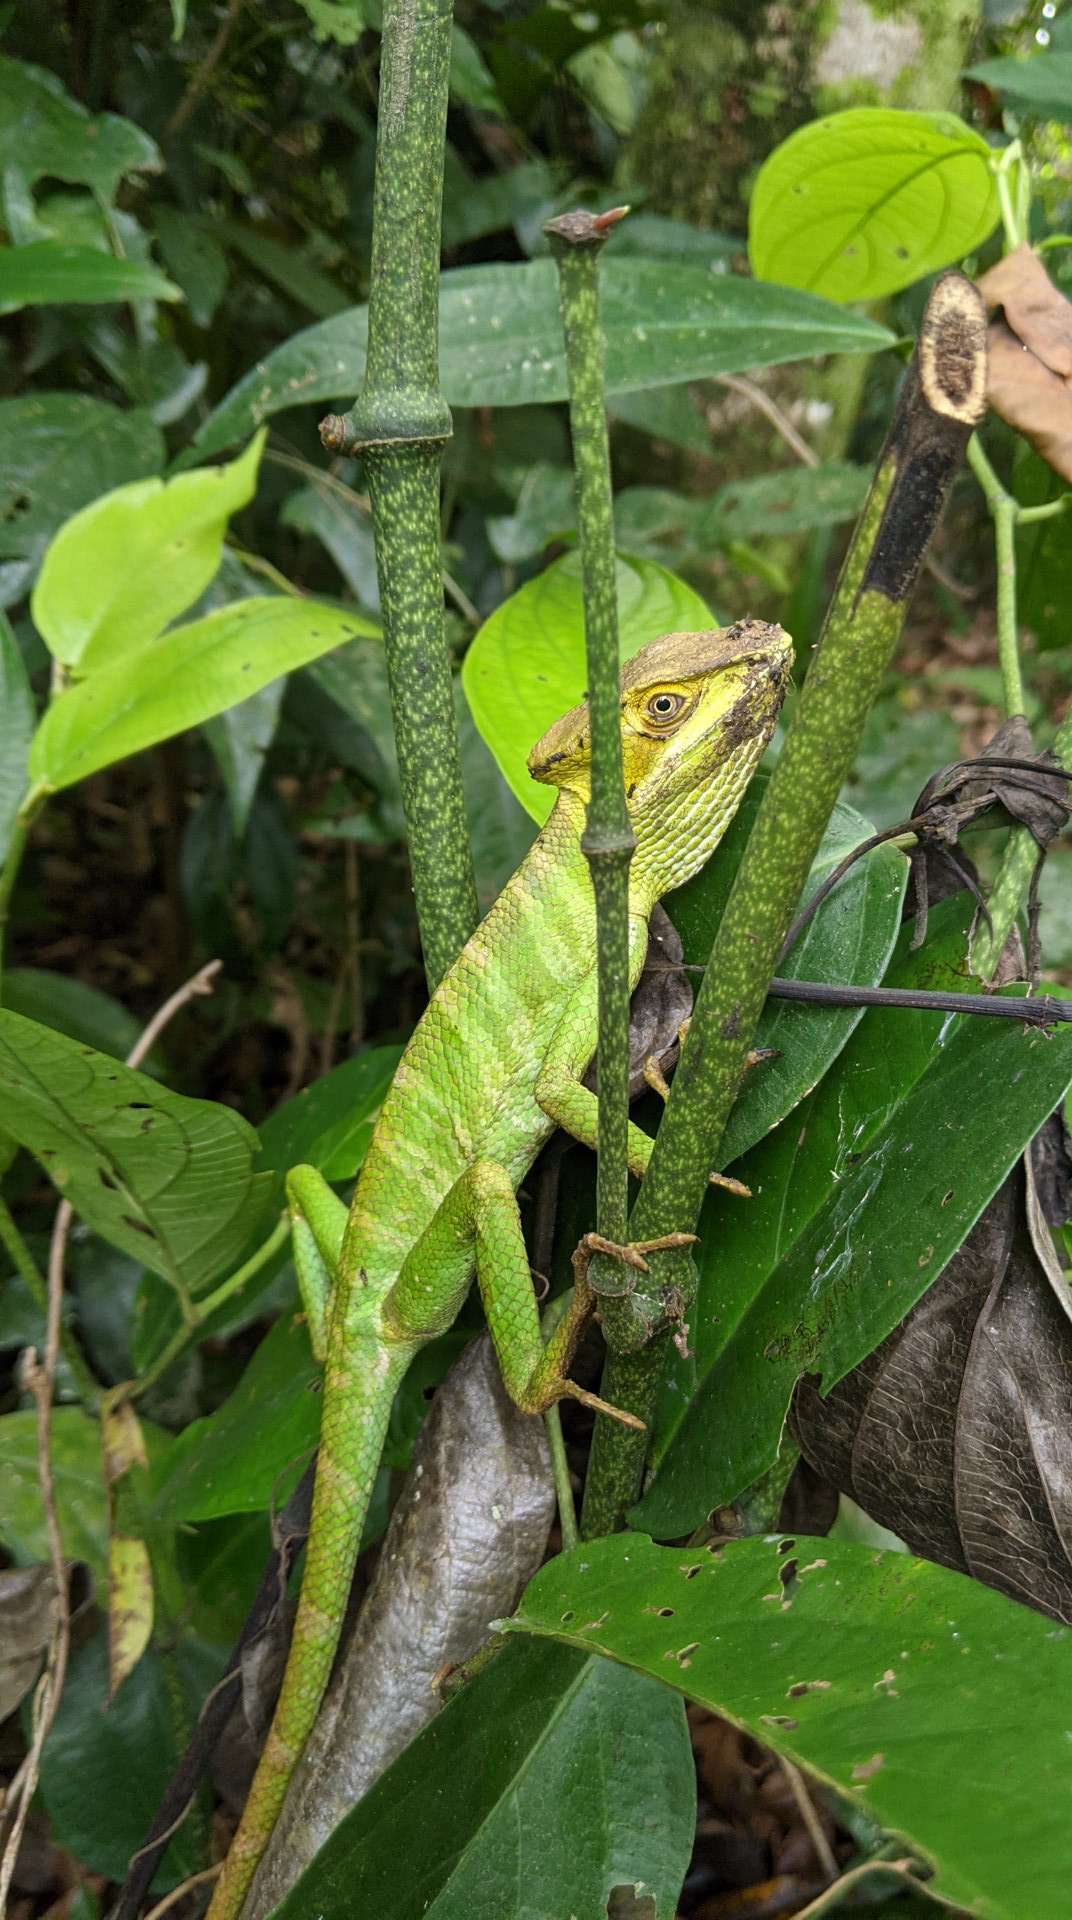 green-lizard-probably-Taponcito